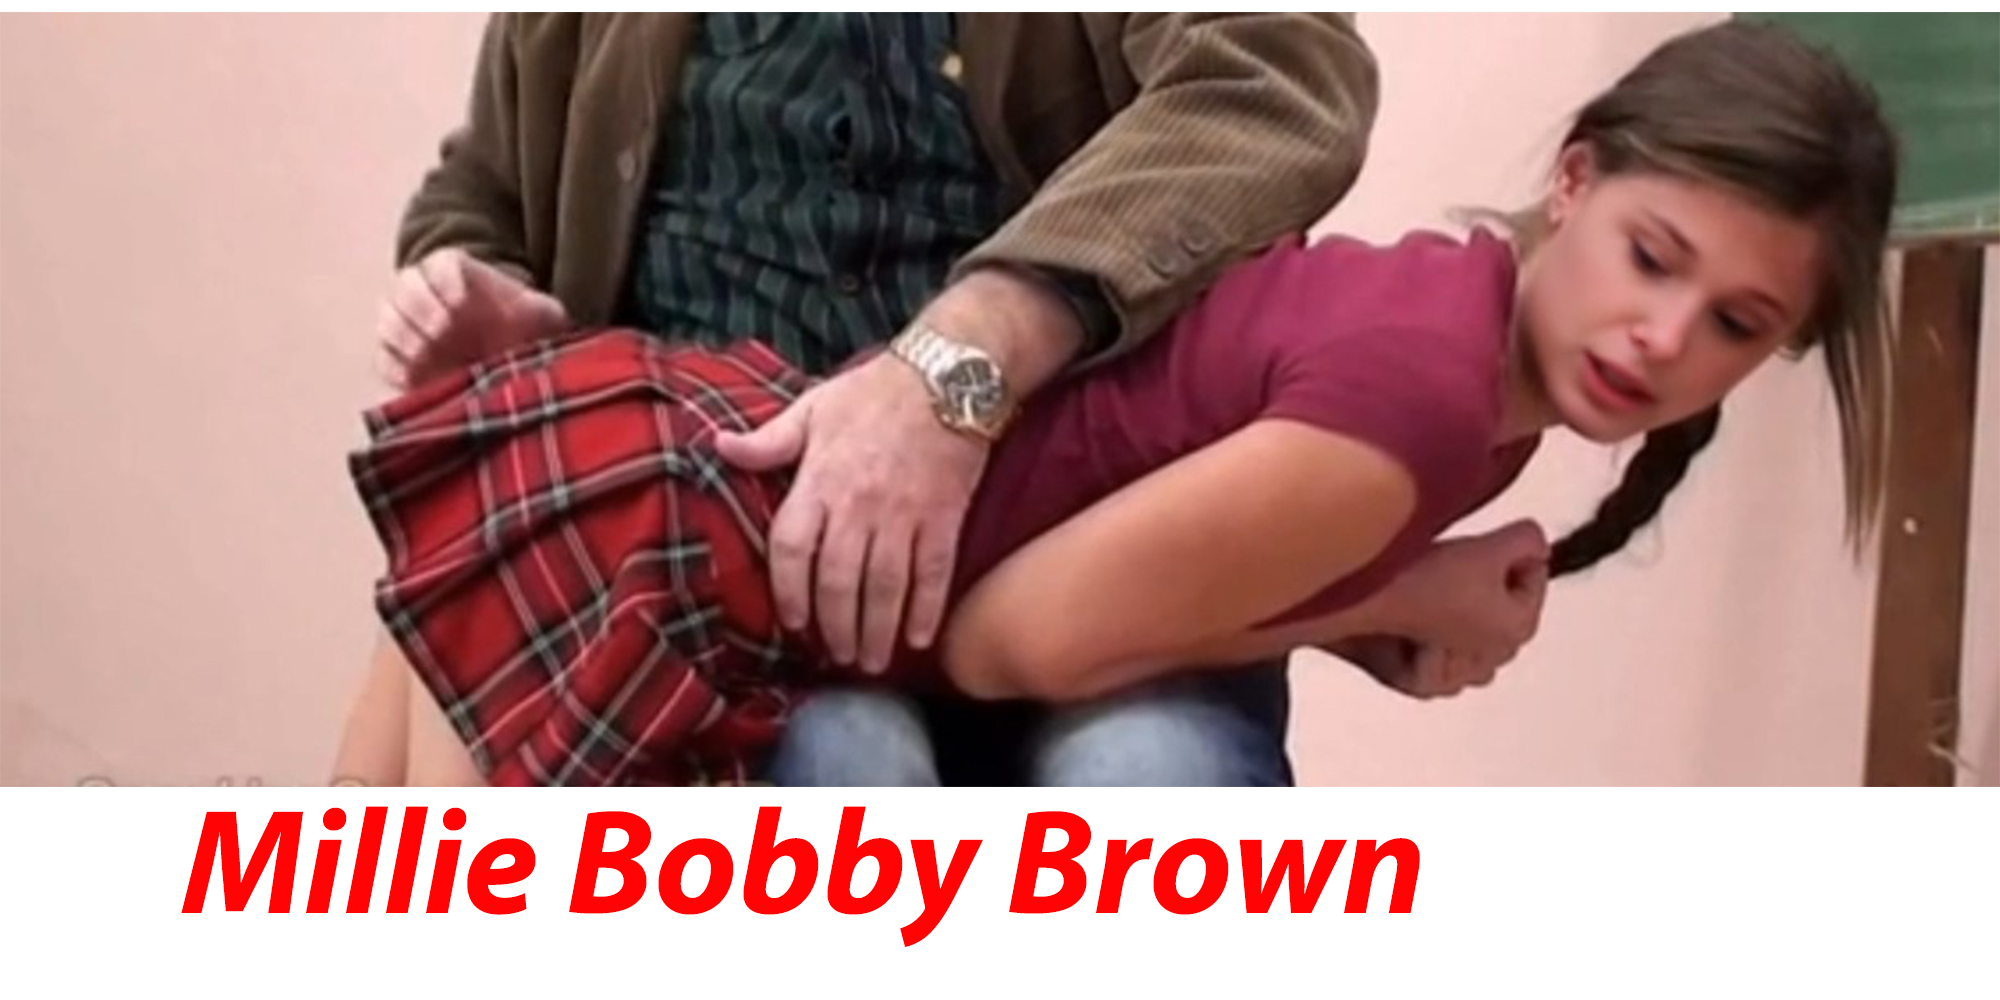 Millie Bobby Brown Get Spanked for doing too many deepfakes (not preview)